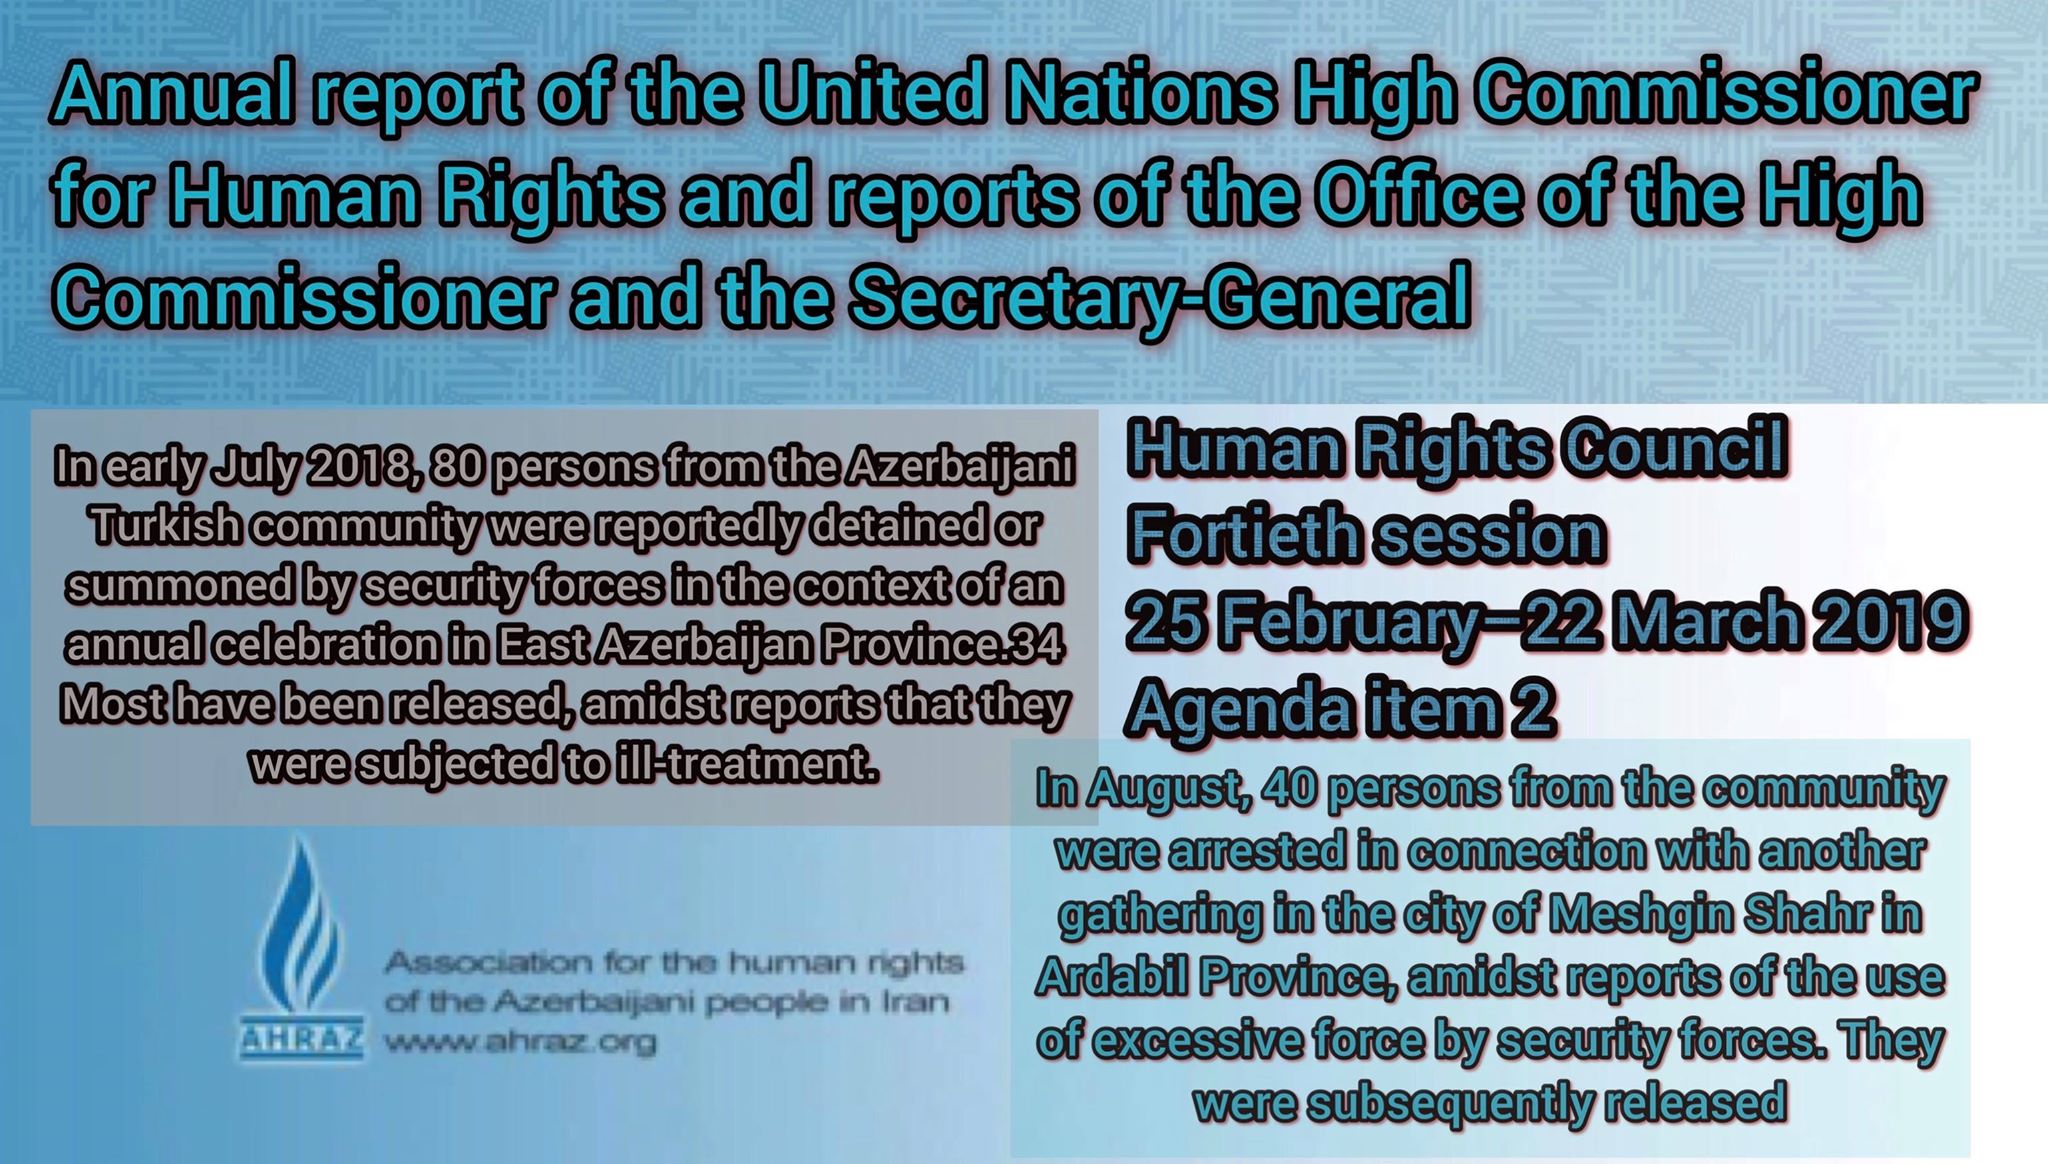 The Annual report of the United Nations High Commissioner, Mr. Antonio Guterres, on human rights in Iran